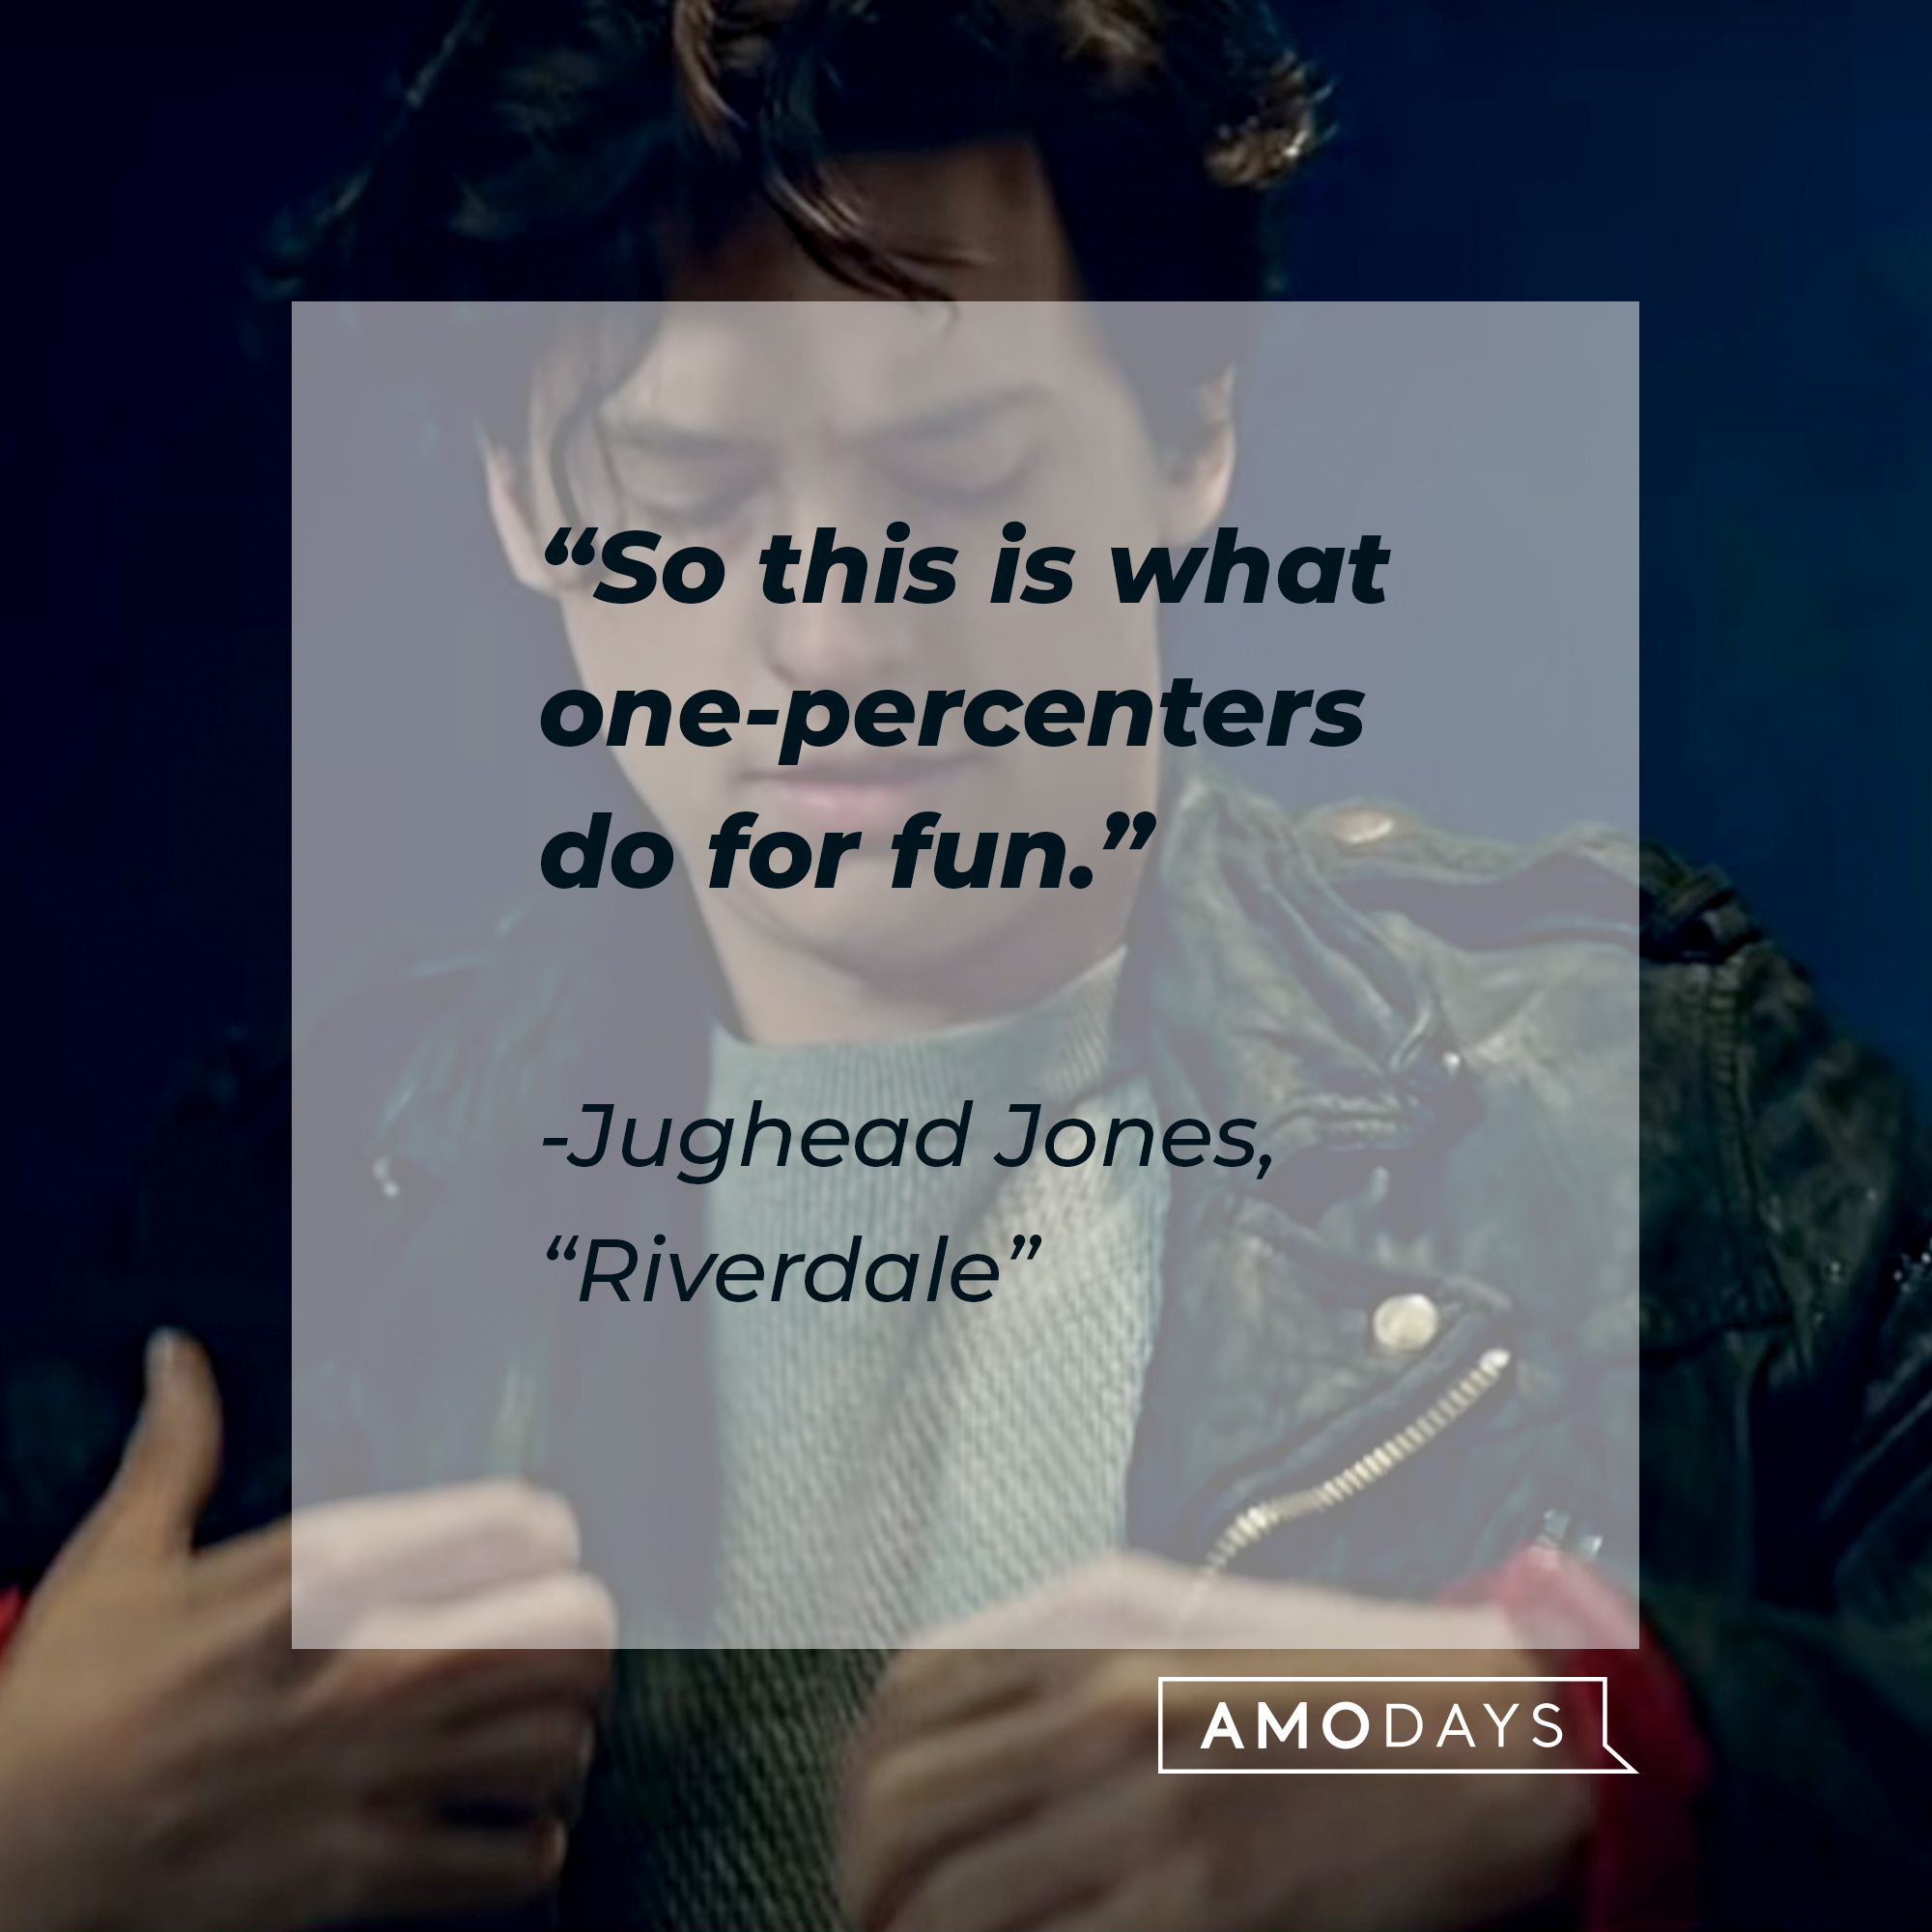 Image of Cole Sprouse as Judhead Jones in "Riverdale" with the quote: “So this is what one-percenters do for fun.”| Source: facebook.com/Riverdale